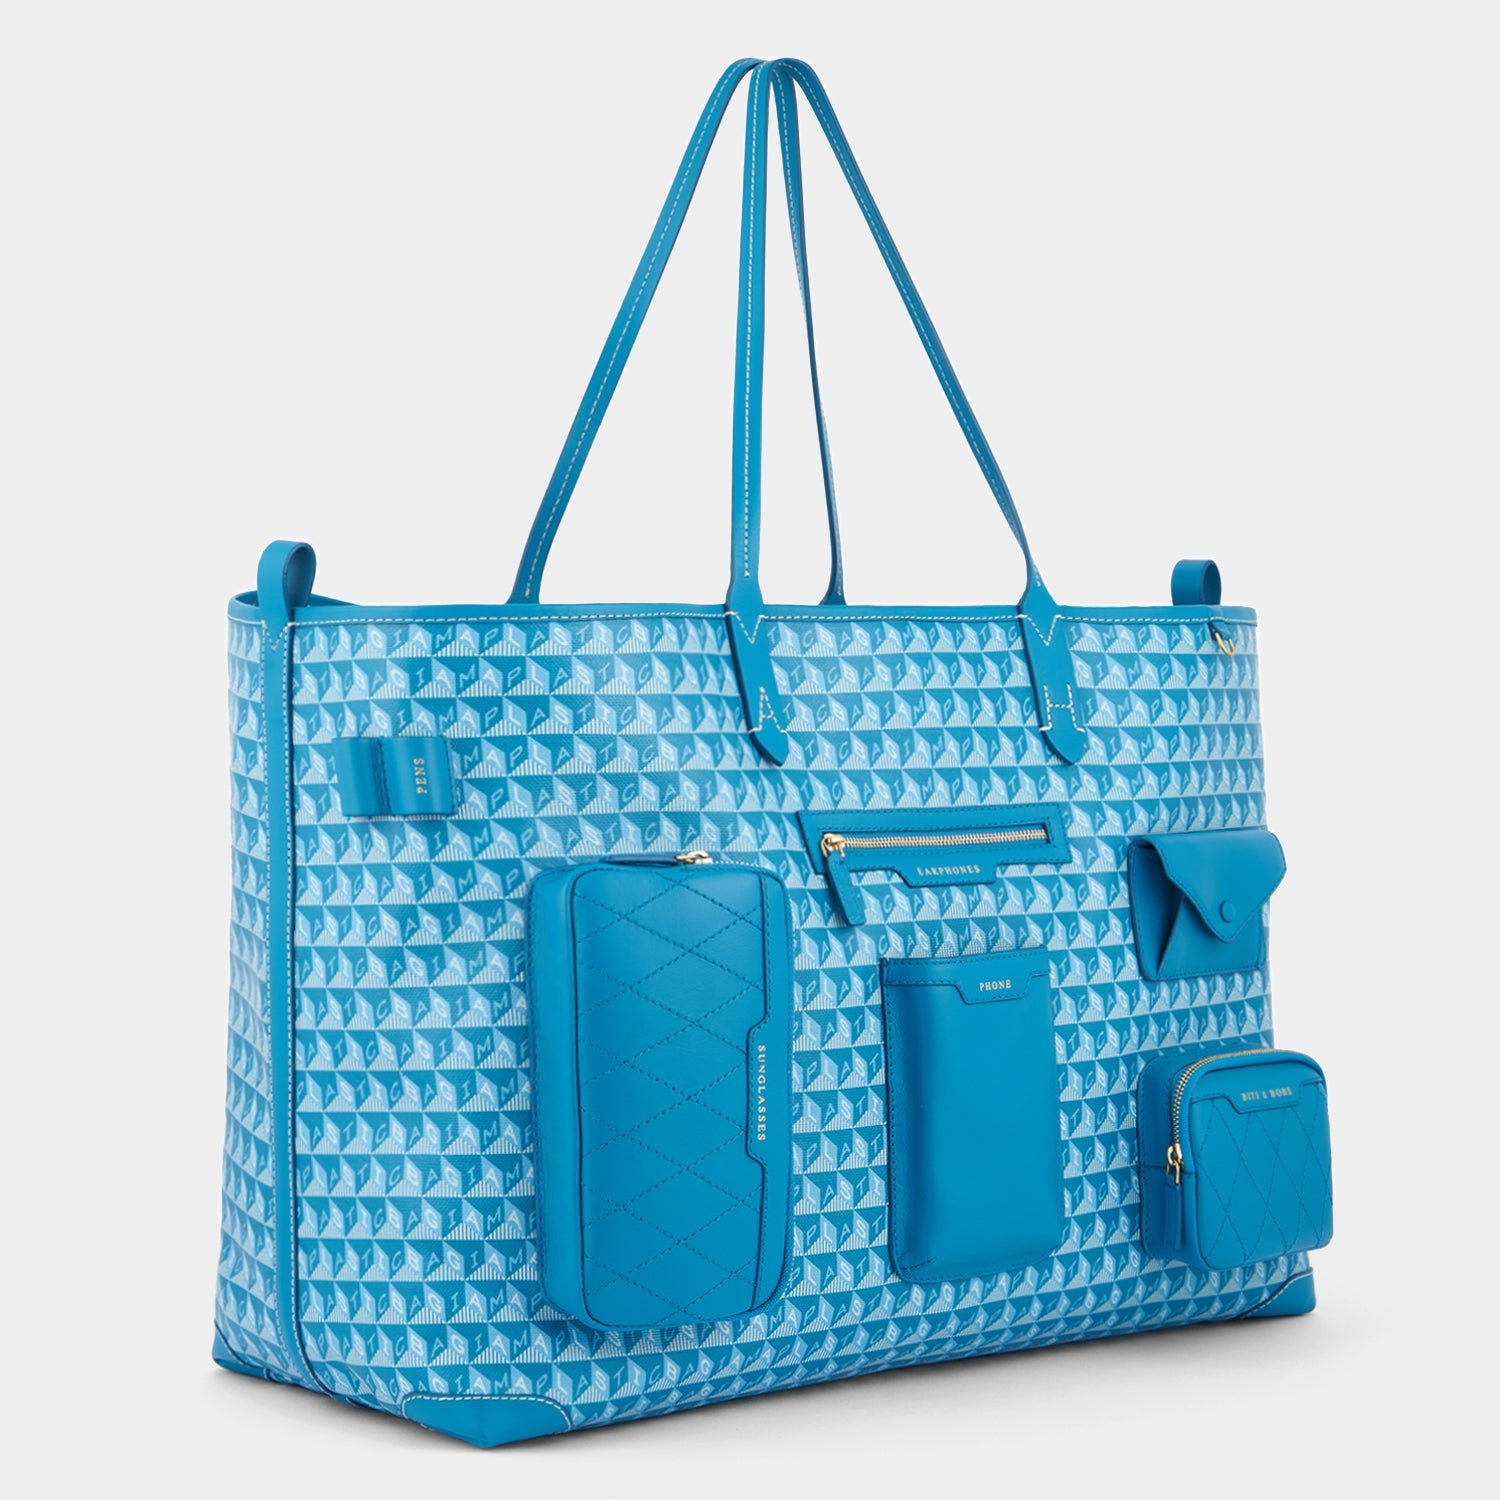 I am a Plastic Bag XL Multi Pocket Tote -

                  
                    Recycled Canvas in Peacock -
                  

                  Anya Hindmarch EU
